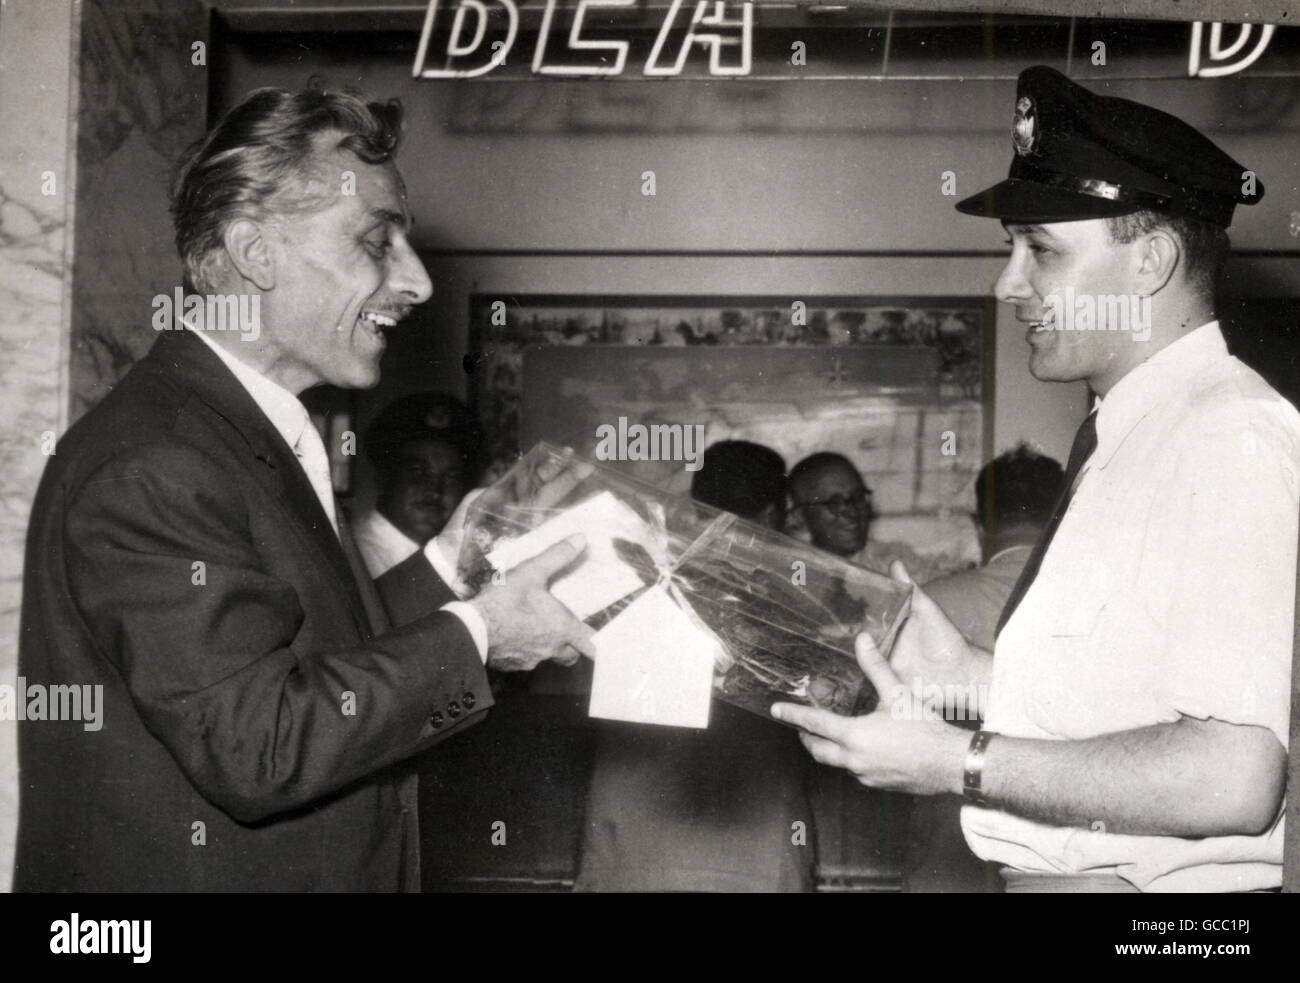 Renato Marmiroli (left), who wants to fight a duel with the Queen's critic, Lord Altrincham, is seen delivering a golden rose as a personal gift to the Queen at the British European Airways office at Rome's Ciampino International Airport. Signor Marmiroli , a former officer of the Italian artillery, sent the rose as a token of his unshakable devotion to the Queen. Stock Photo